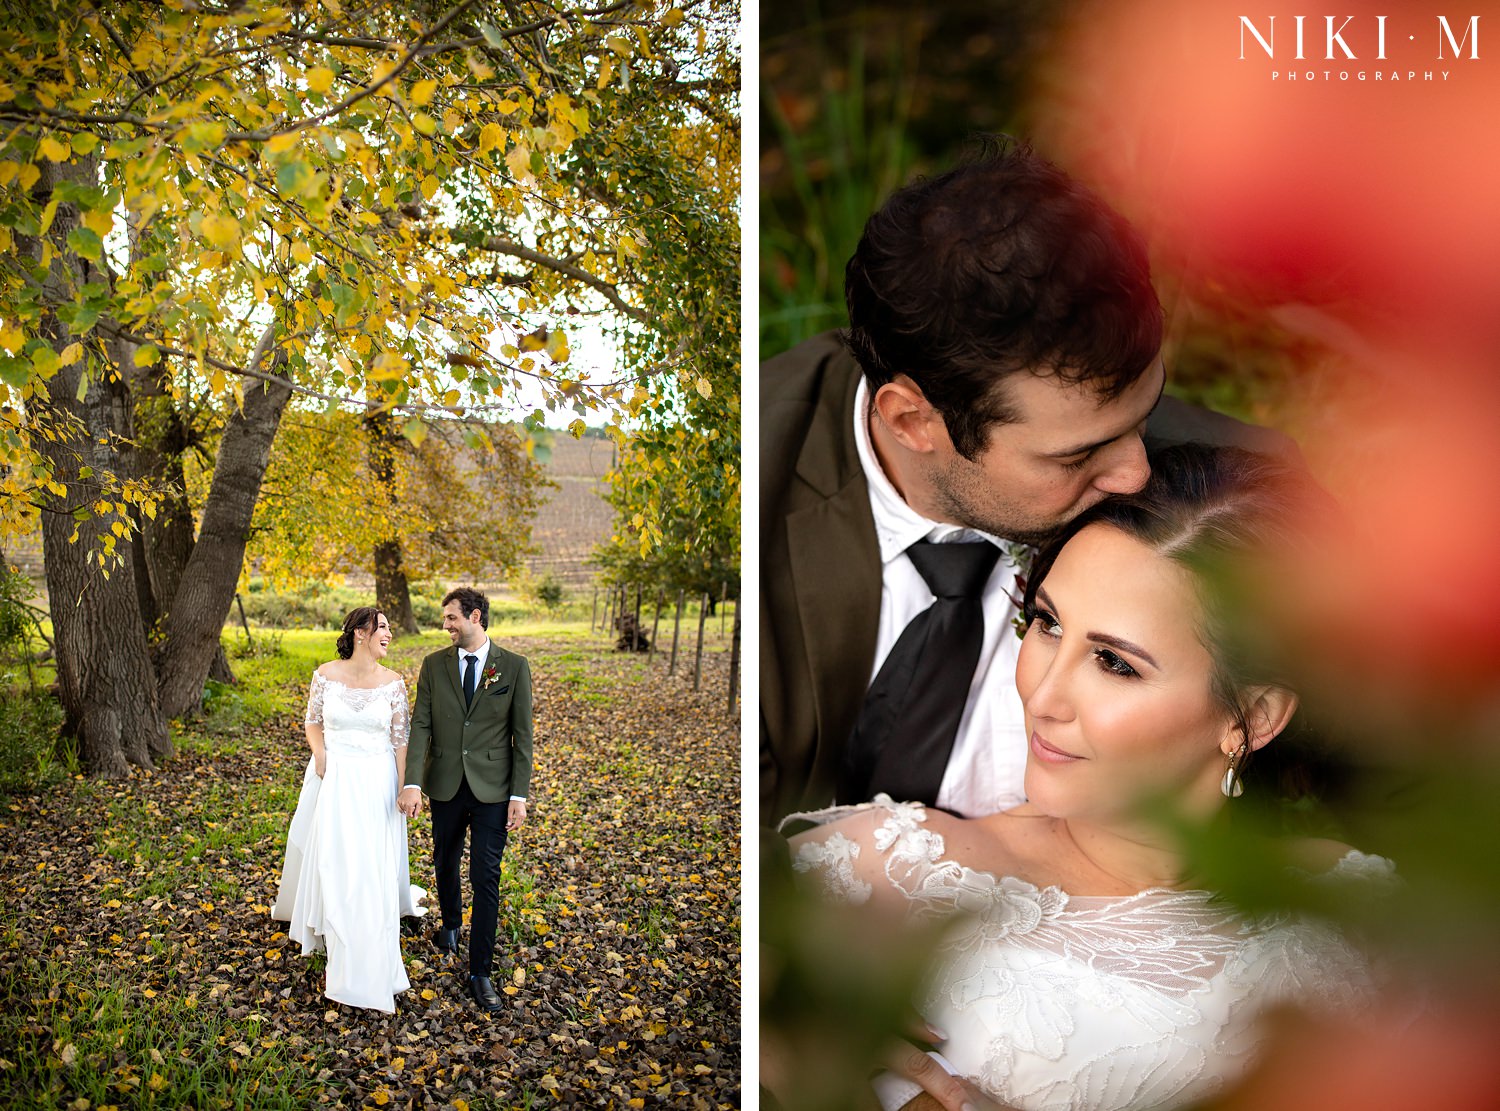 The wedding couple have their photos taken in the Autumn foliage during the month of May at their Elgin wedding